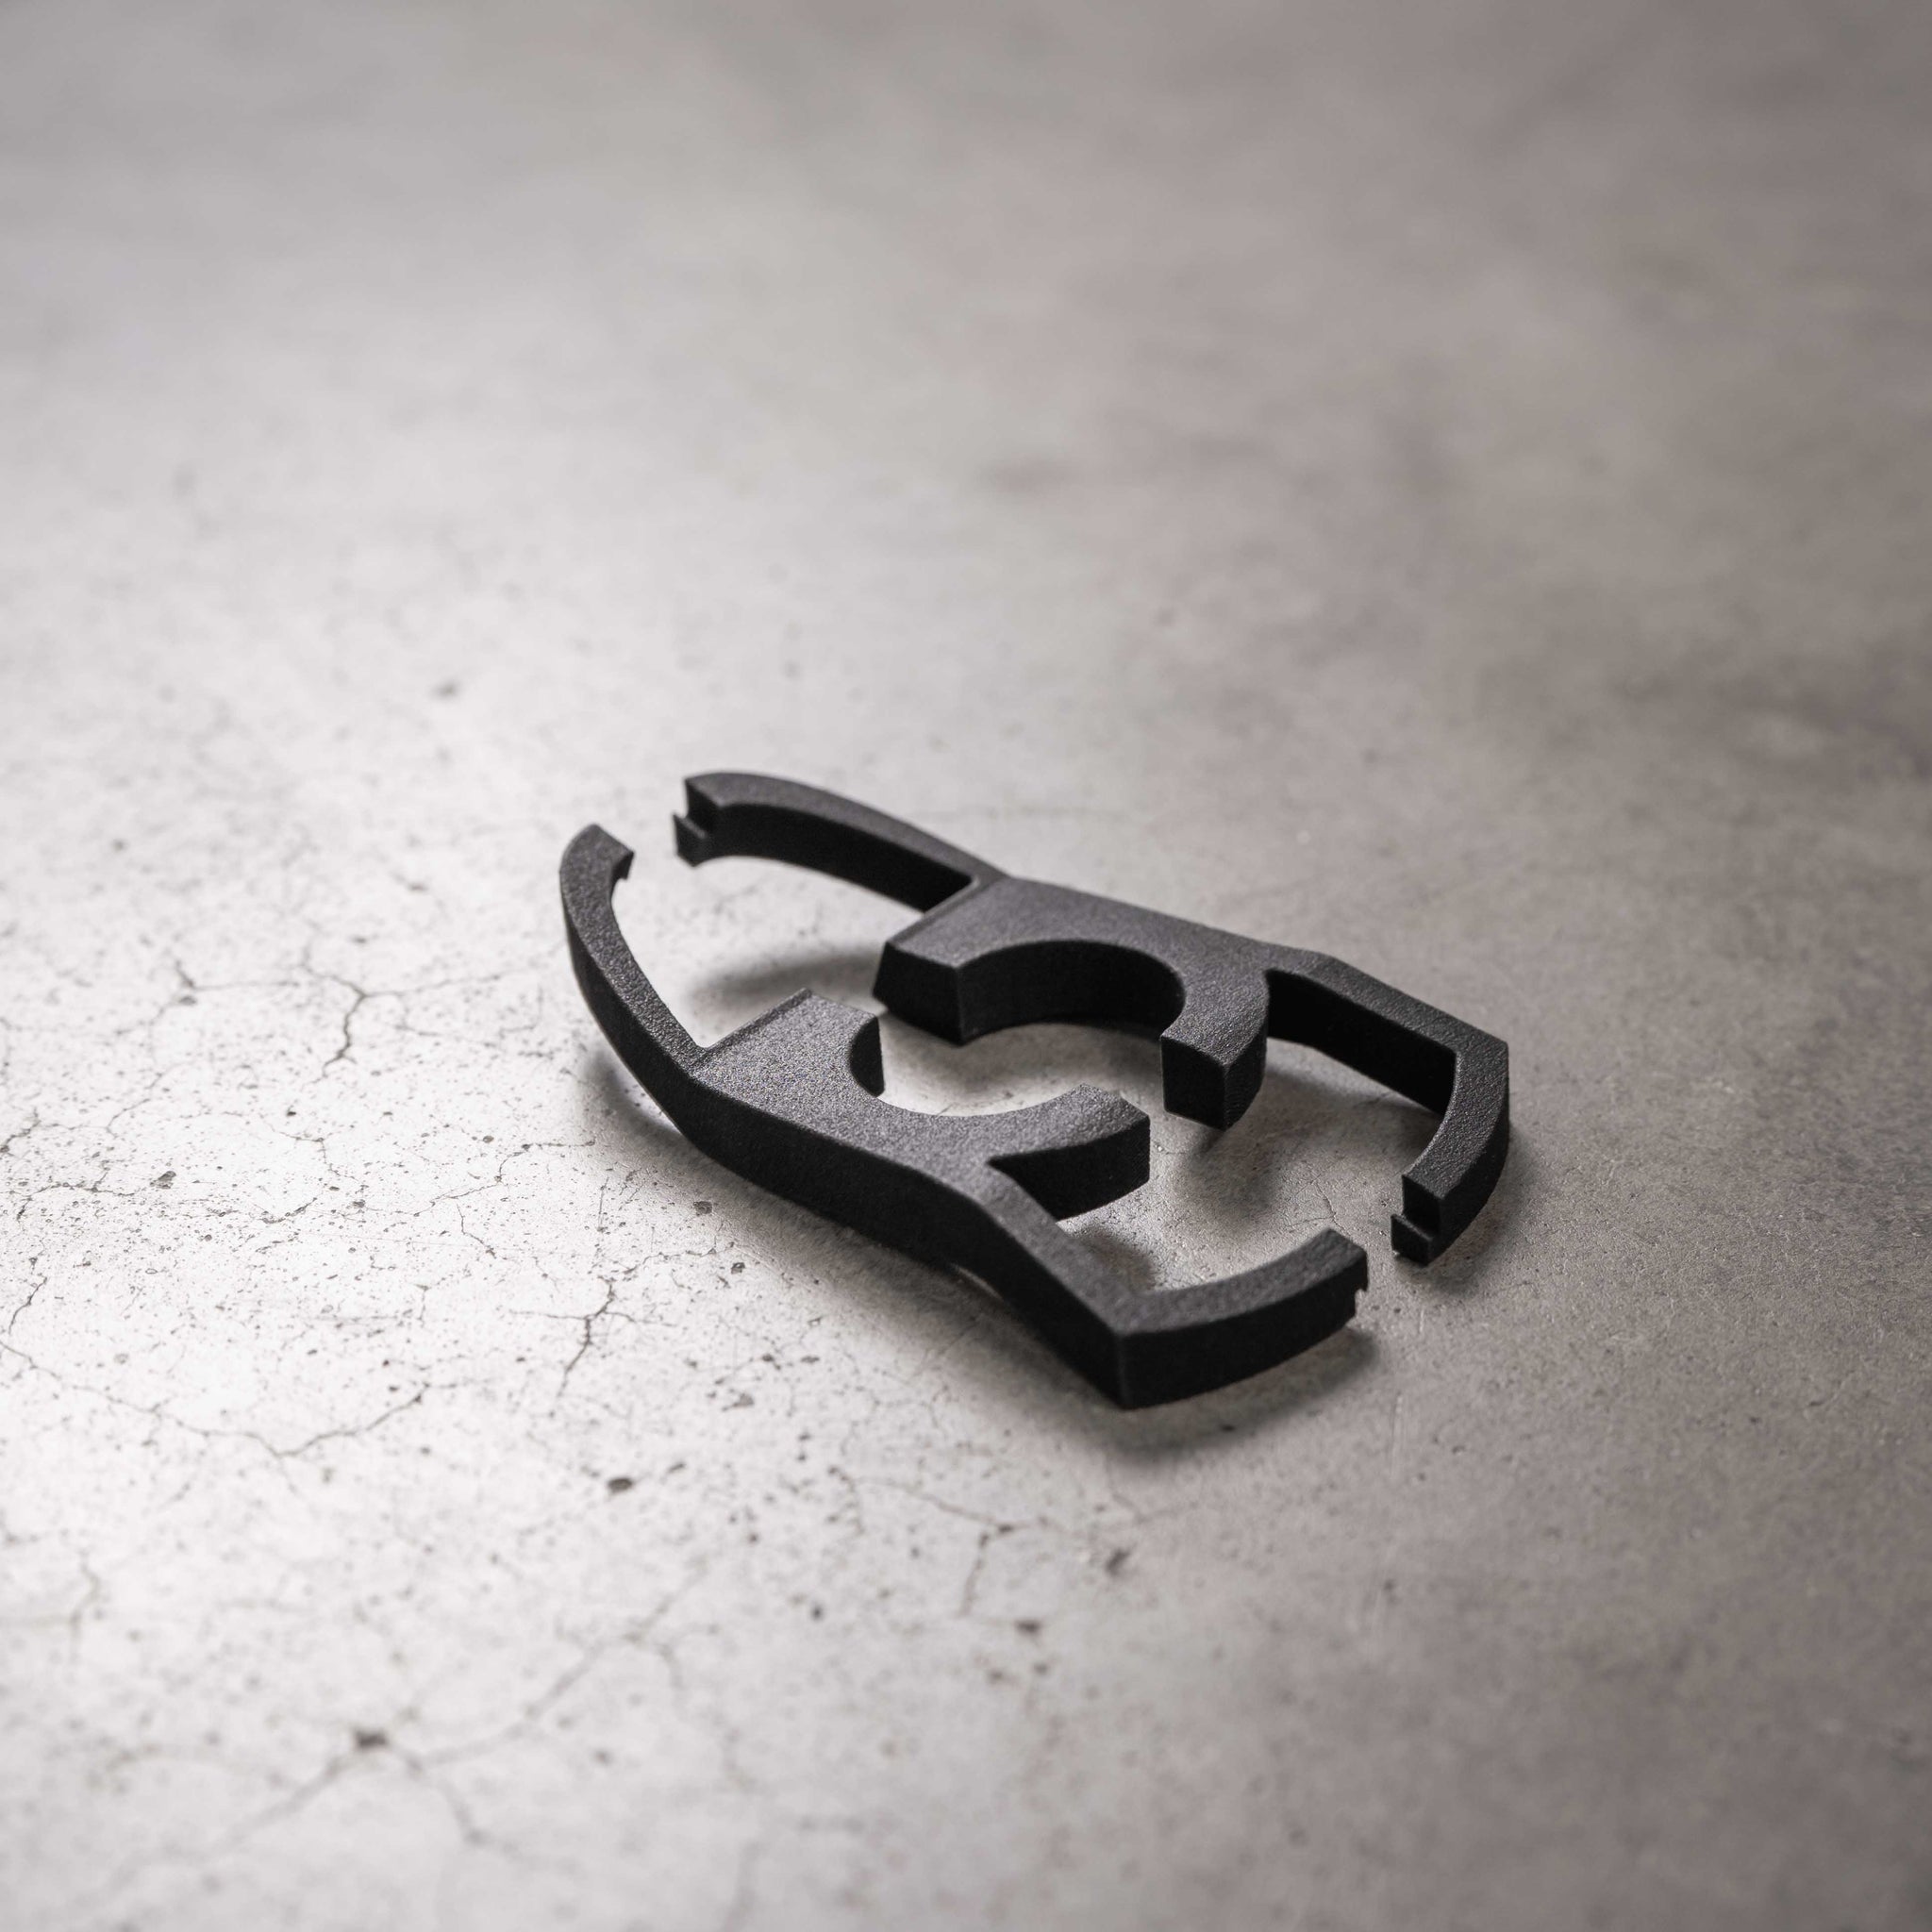 10mm headset Spacer